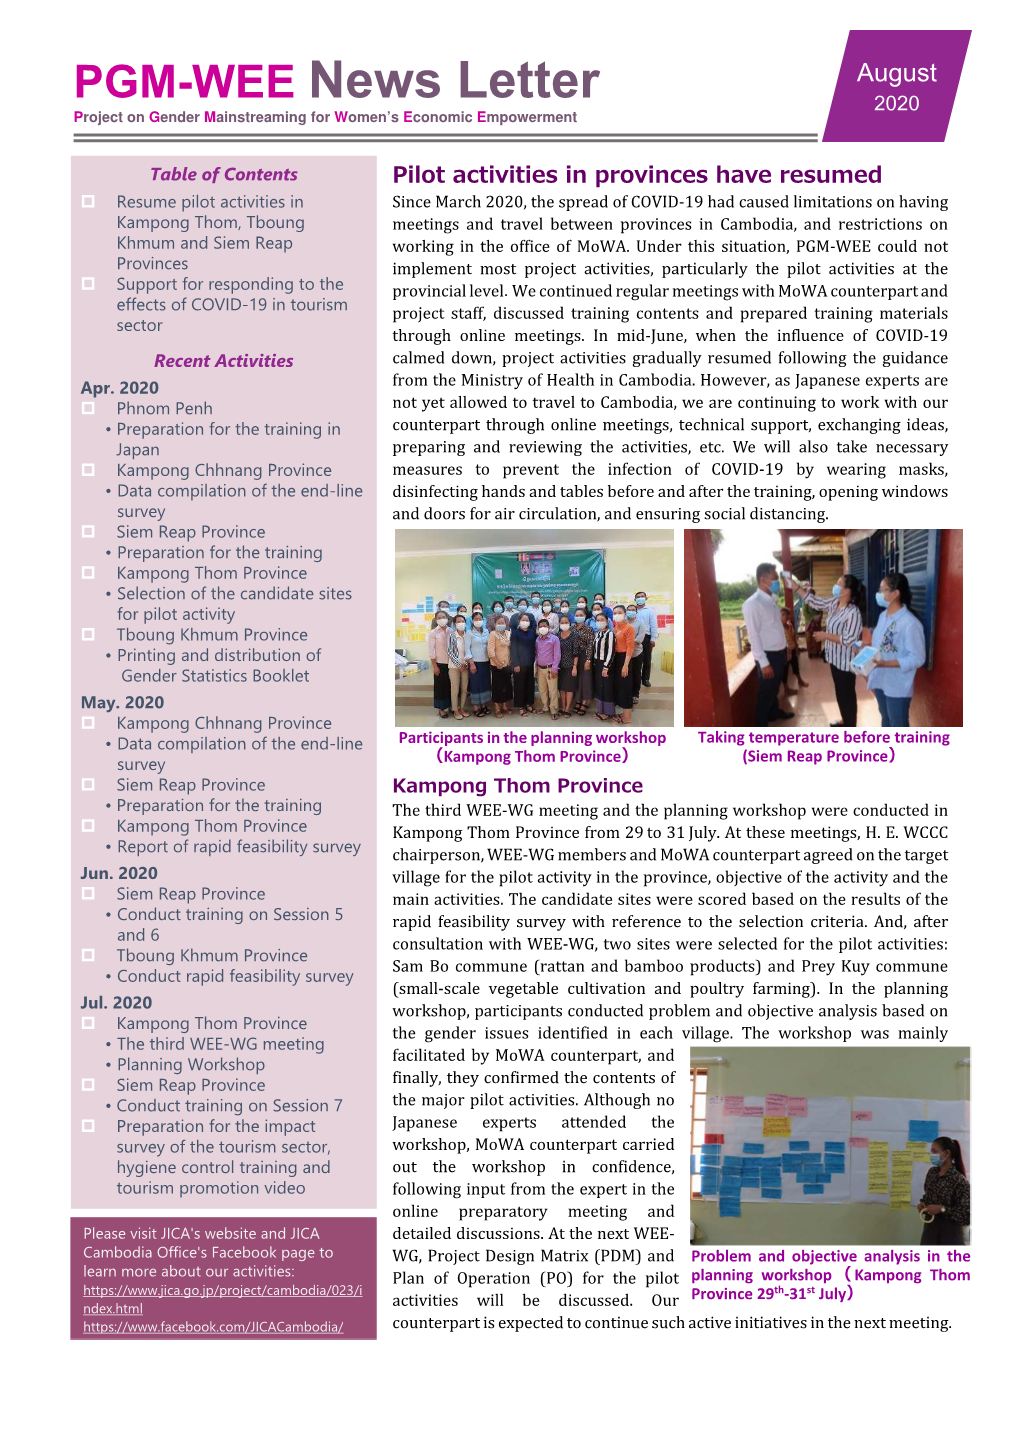 PGM-WEE News Letter 2020 Project on Gender Mainstreaming for Women’S Economic Empowerment